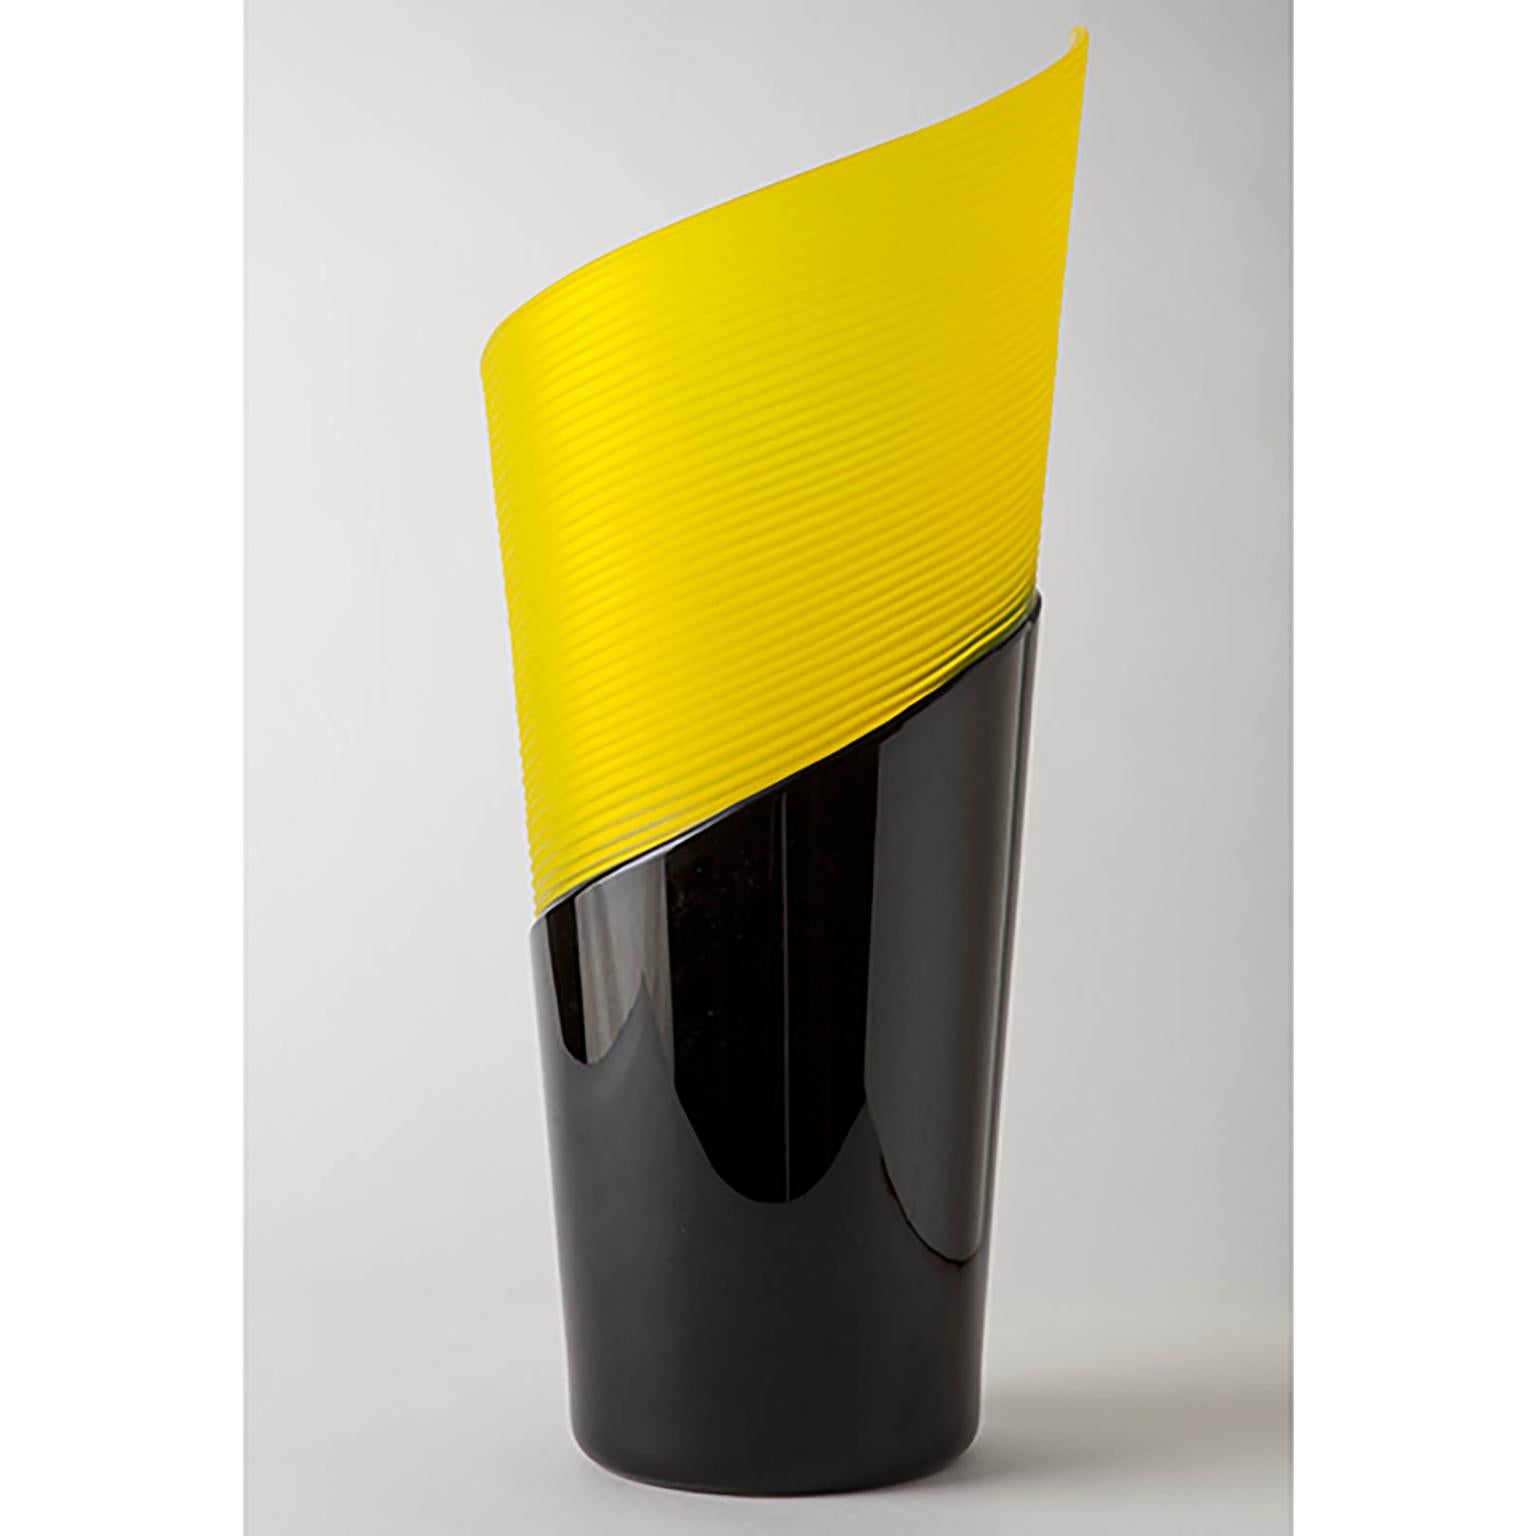 Elevate your home decor with this gorgeous handmade Murano glass vase. Crafted by skilled artisans, this vase features a contemporary and eclectic design.

The intricate etched pattern adds texture and depth to the piece, while the black and yellow